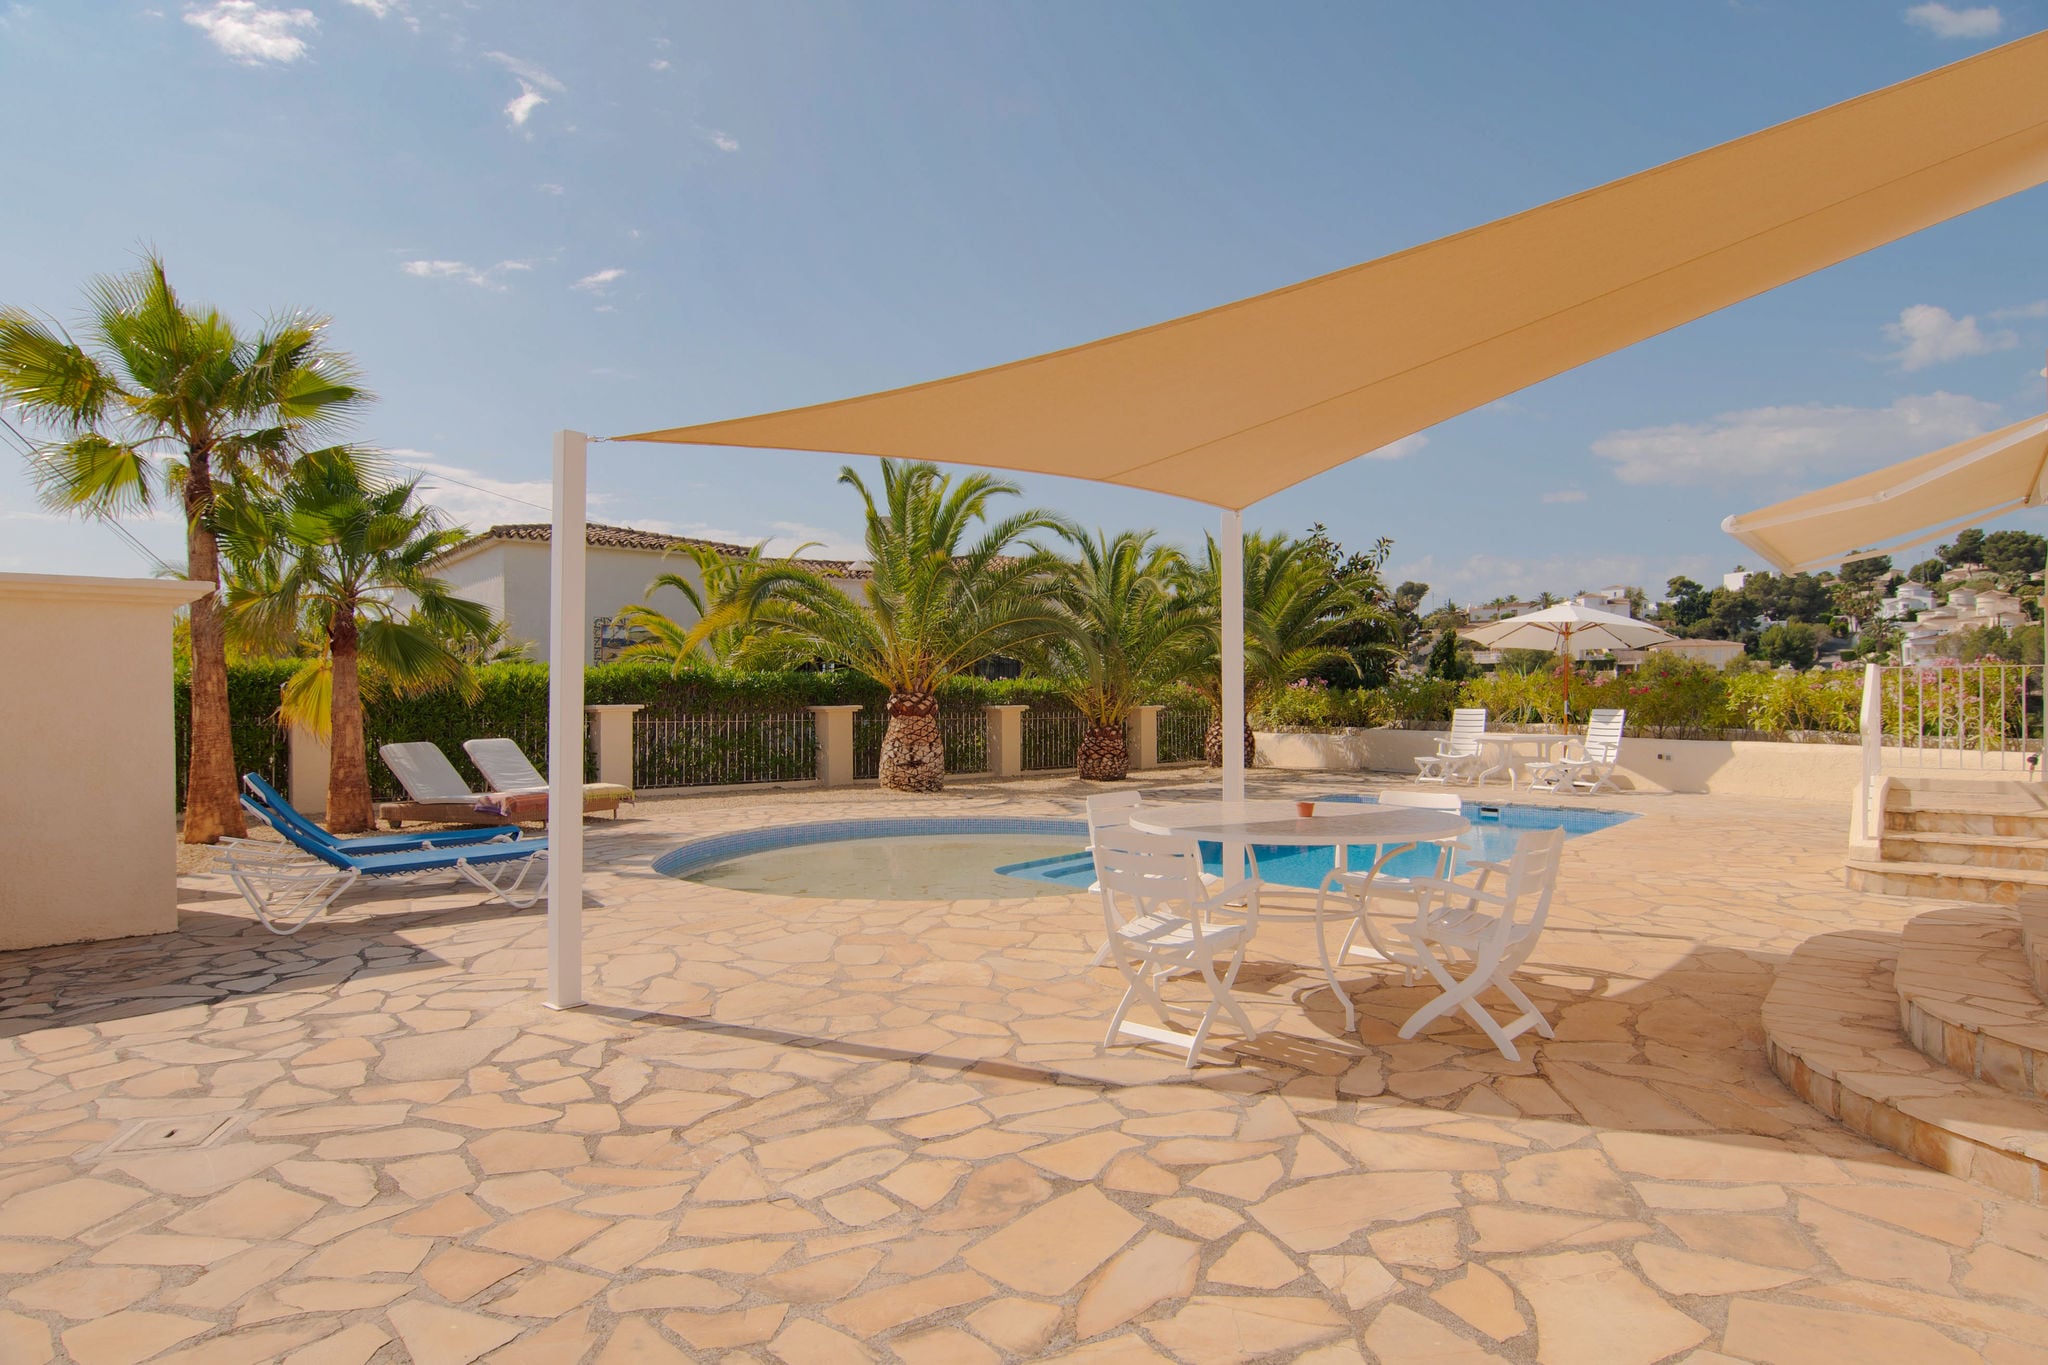 Fantastic Villa for 6 people, terraces with great views, private pool